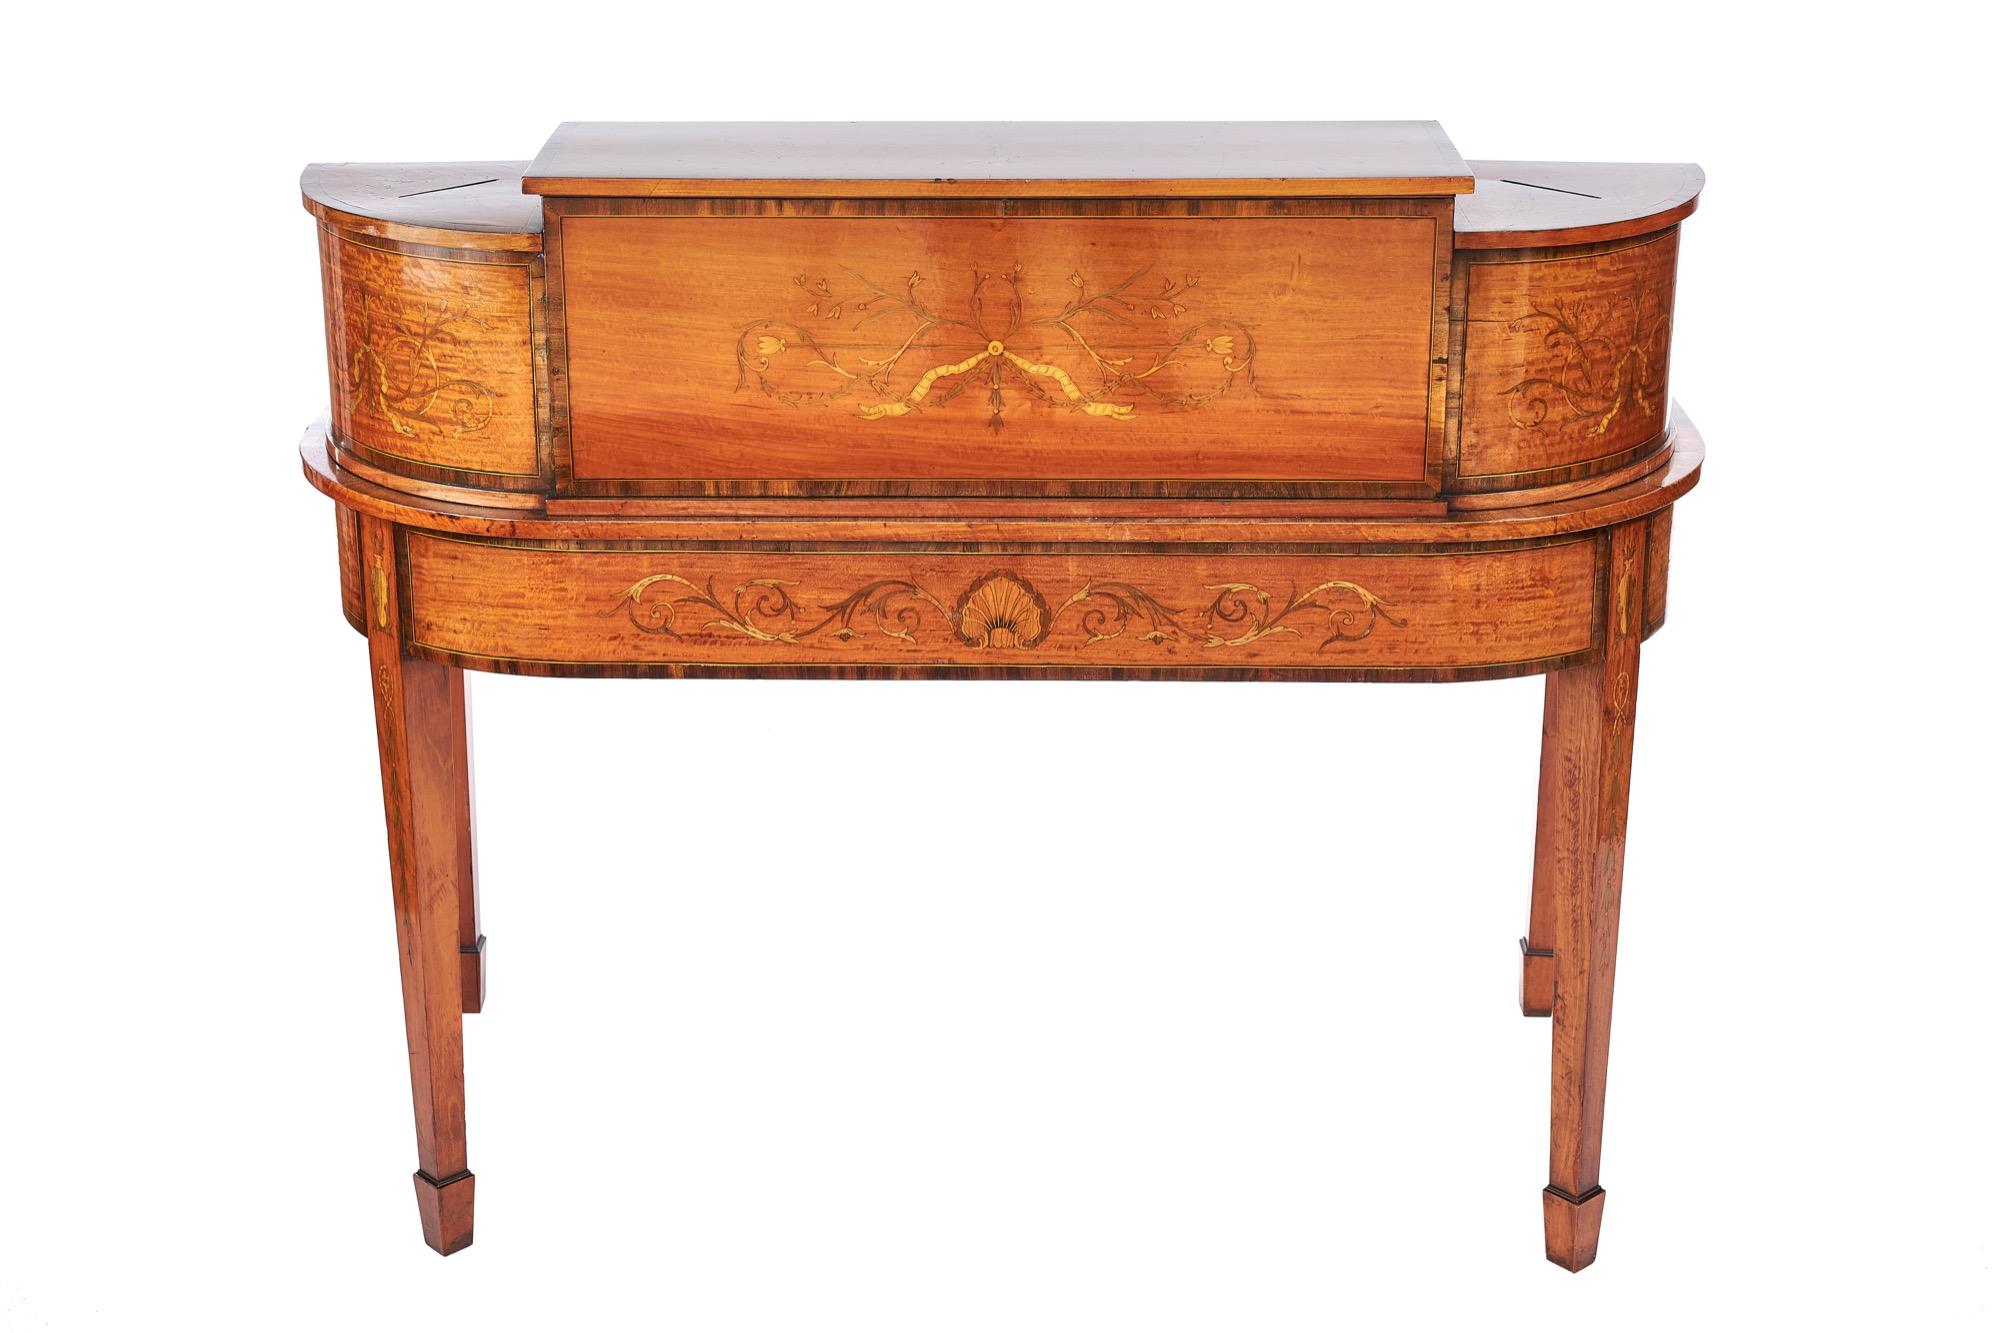 Inlay Fine Sheraton Revival Satinwood Inlaid Carlton House Desk. with Letter Boxes, Ci For Sale